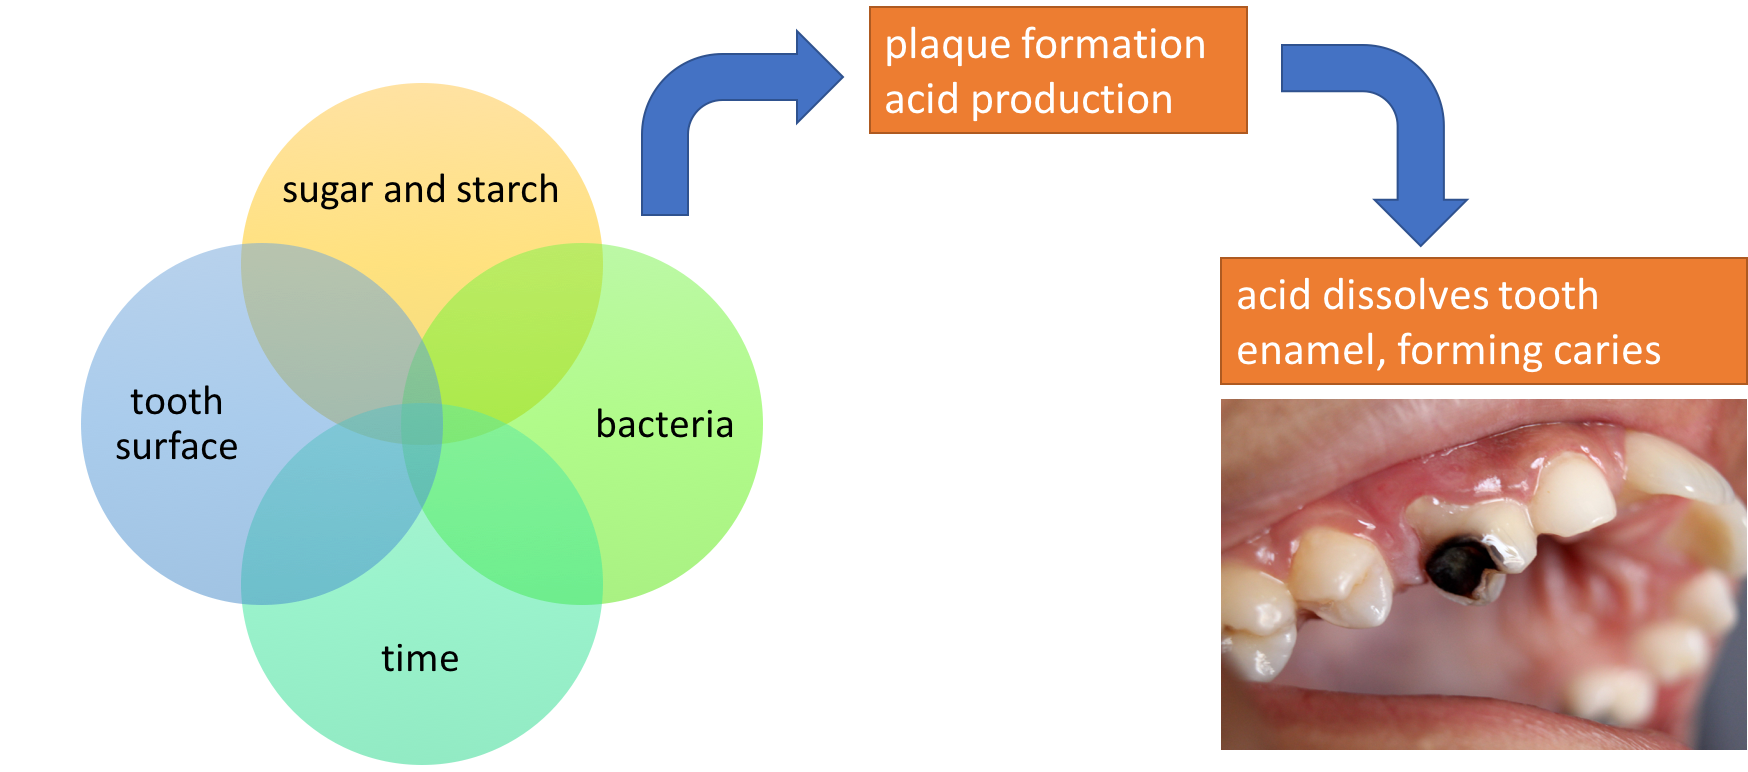 The image is a schematic. On the left, it shows a Venn diagram with four circles coming together, with the words "tooth surface," "sugar and starch," "bacteria," and "time." When these 4 factors are present, the schematic shows that it results in plaque formation and acid production. This then leads to acid dissolving tooth enamel, forming dental caries. A photo shows a tooth with a severe cavity, with half of the tooth blackened.